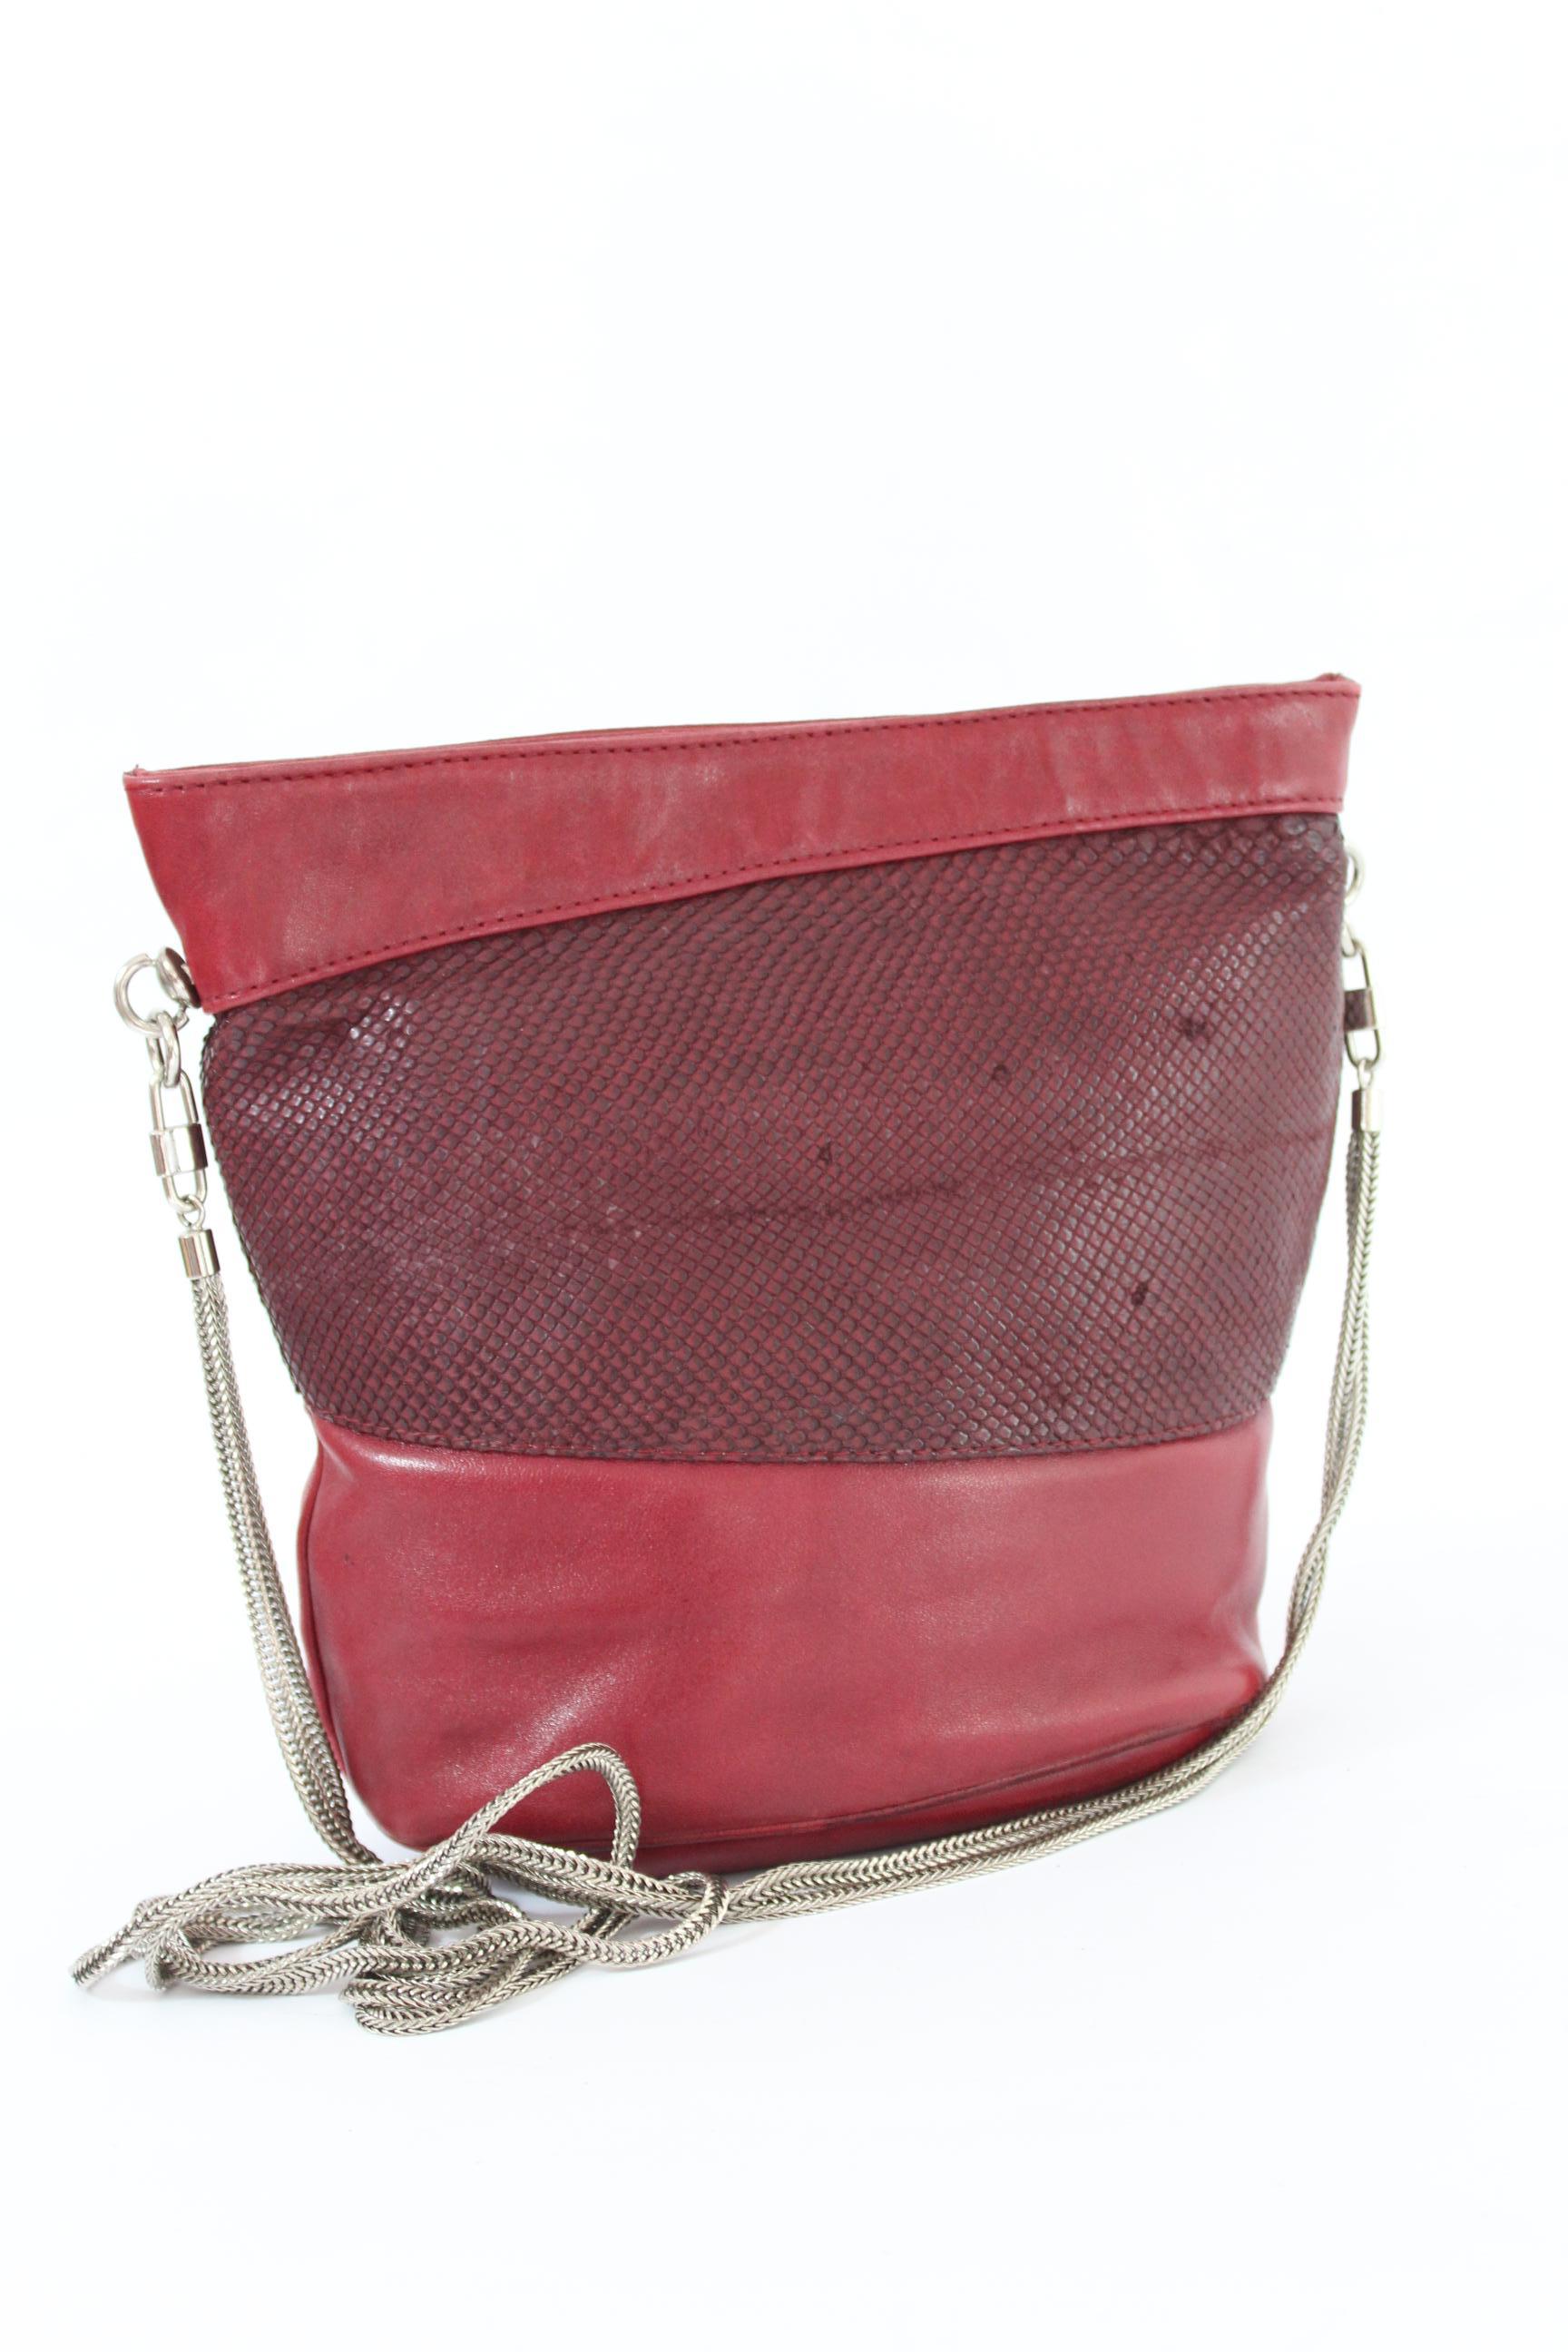 Gianni Versace Red Reptile Leather Shoulder Bucket Bag 1980s 1